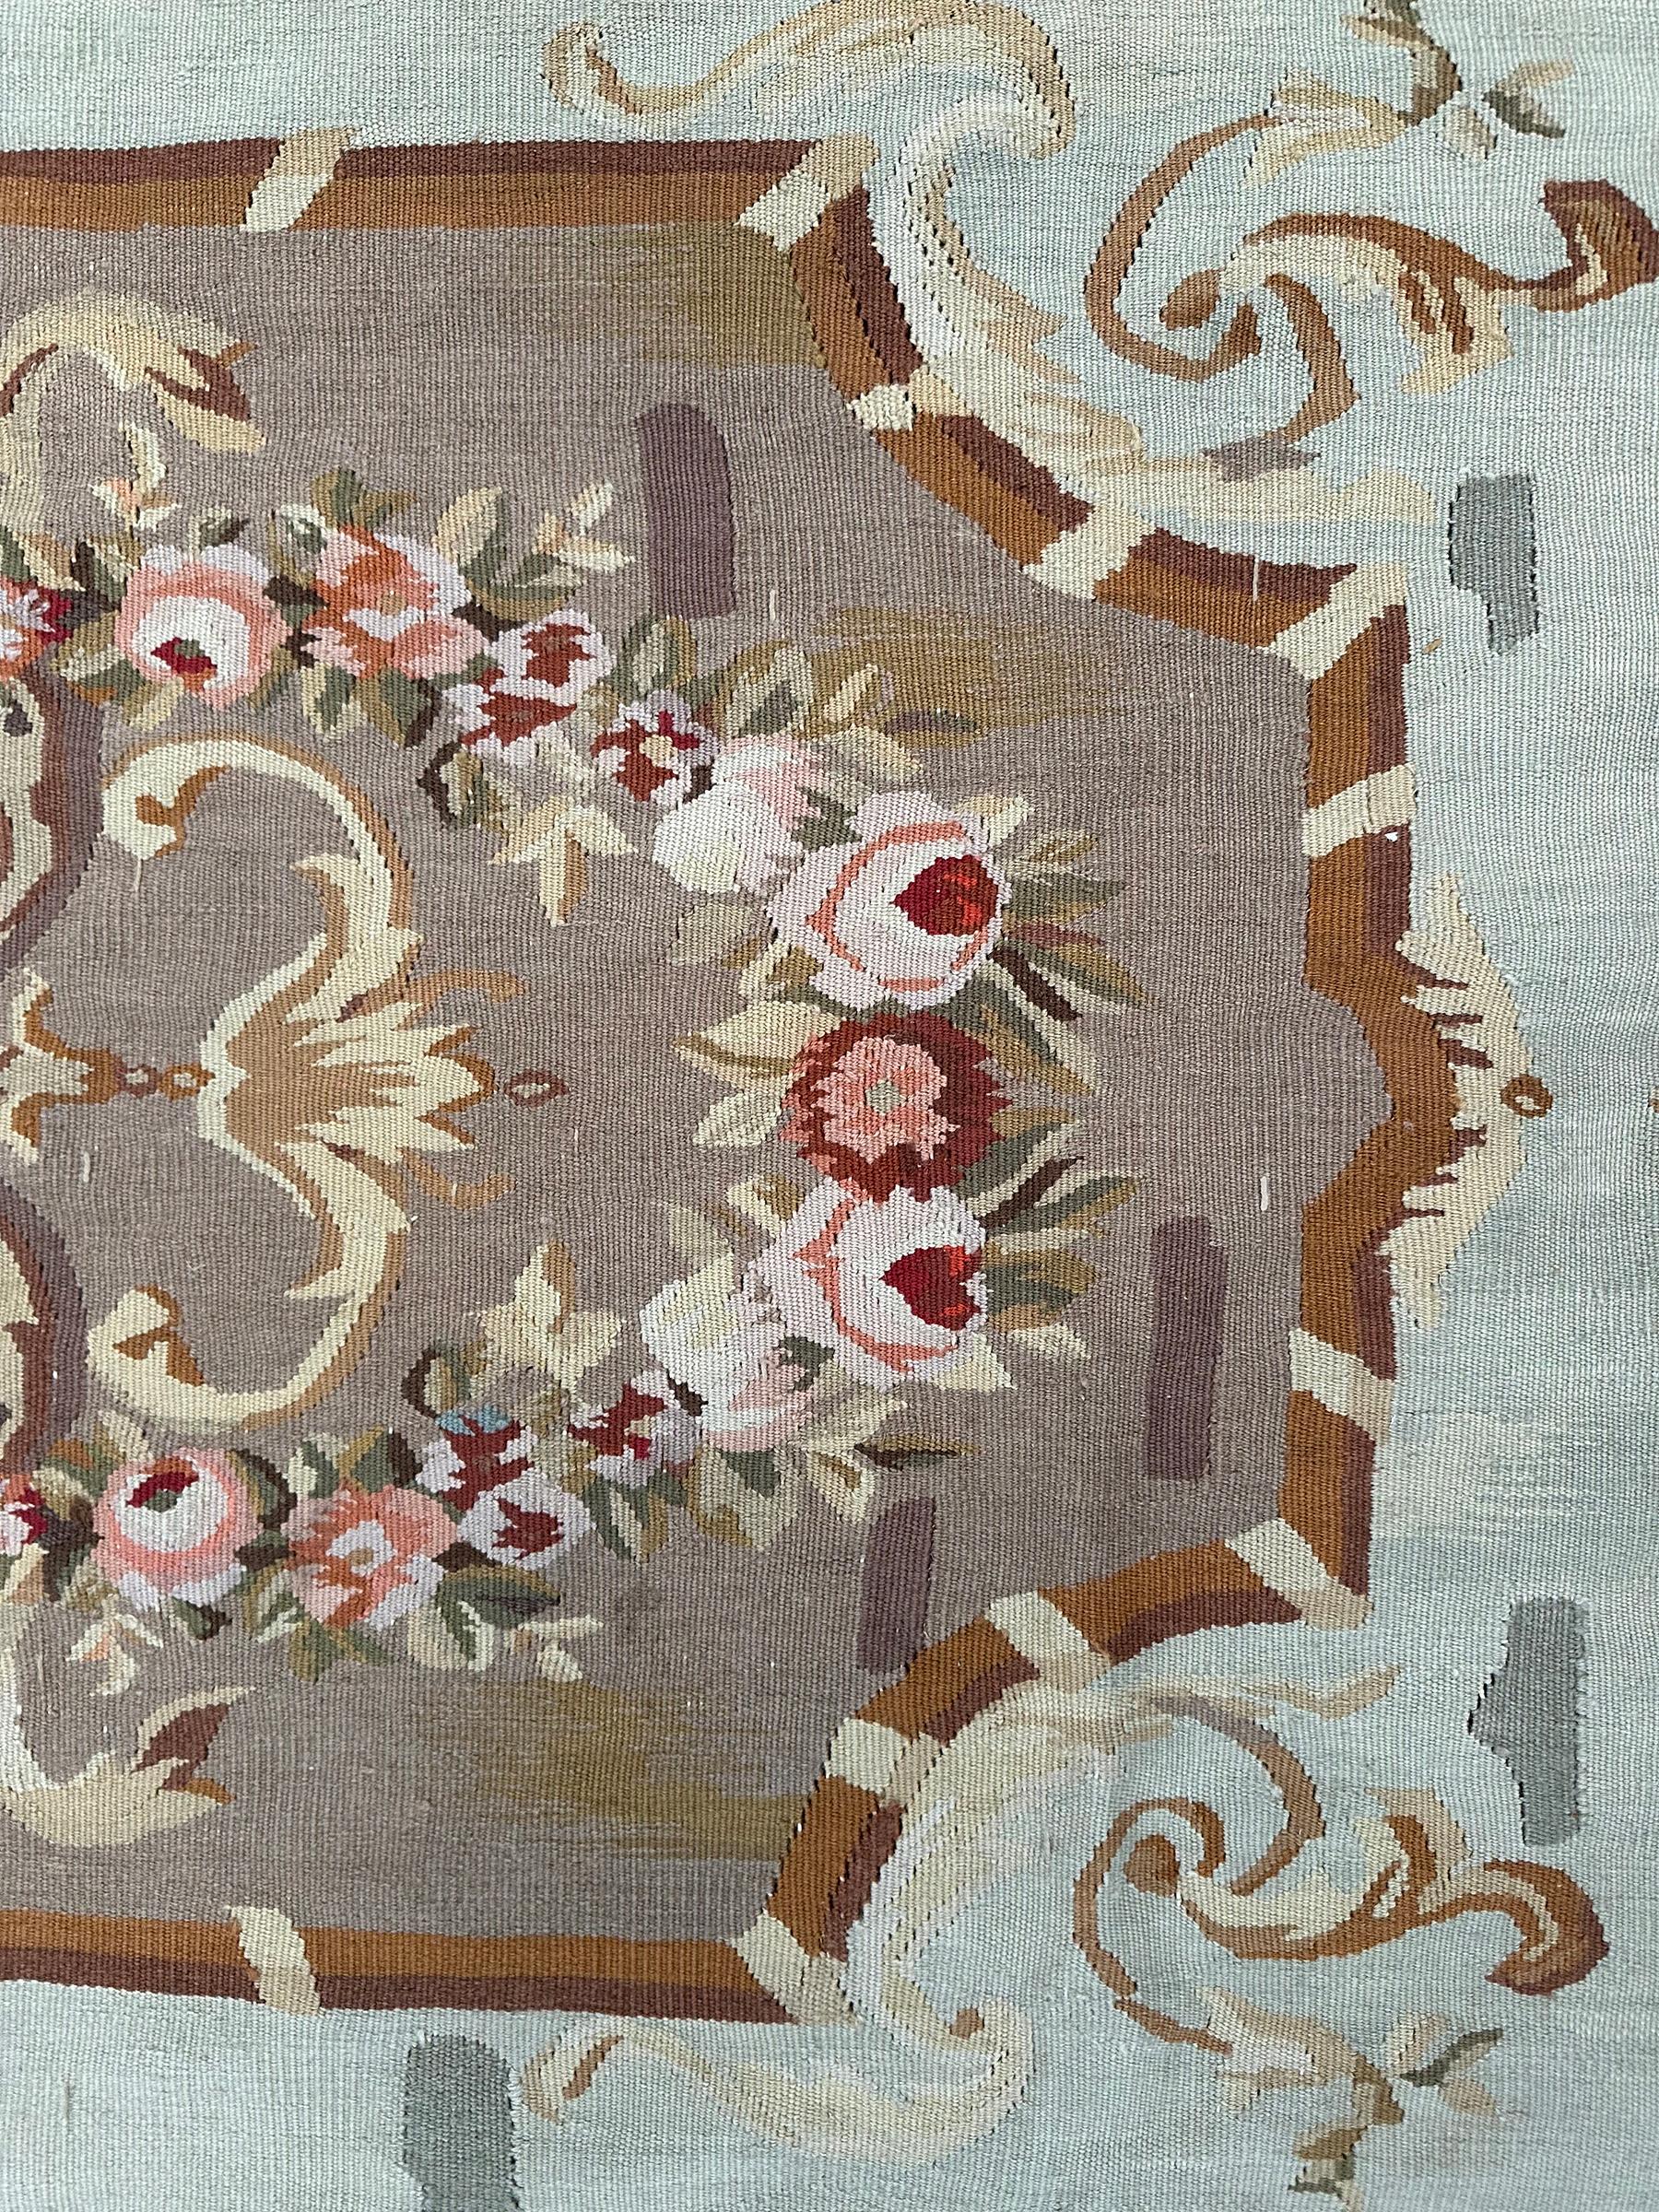 Antique French Aubusson Rug Hand Woven 1880 6x7ft Rare Design 178cm x 206cm For Sale 2